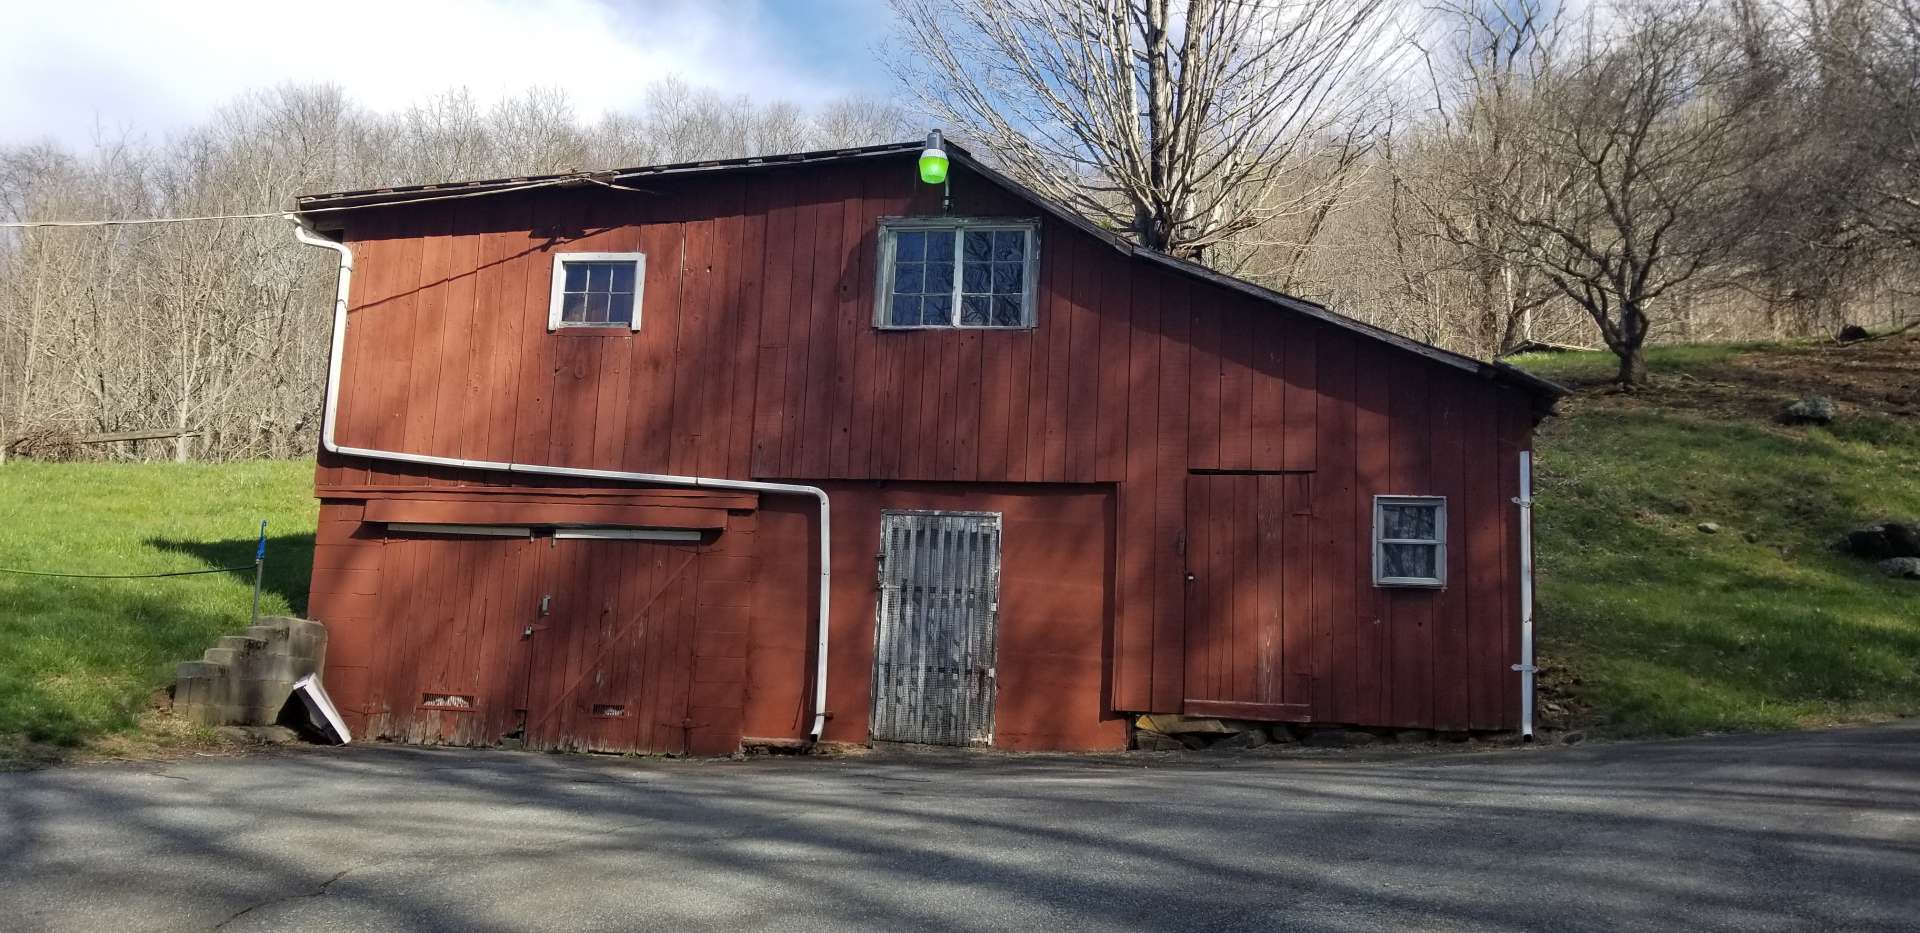 Barn with storage, work shop, and detached garage, has wood stove with flue.